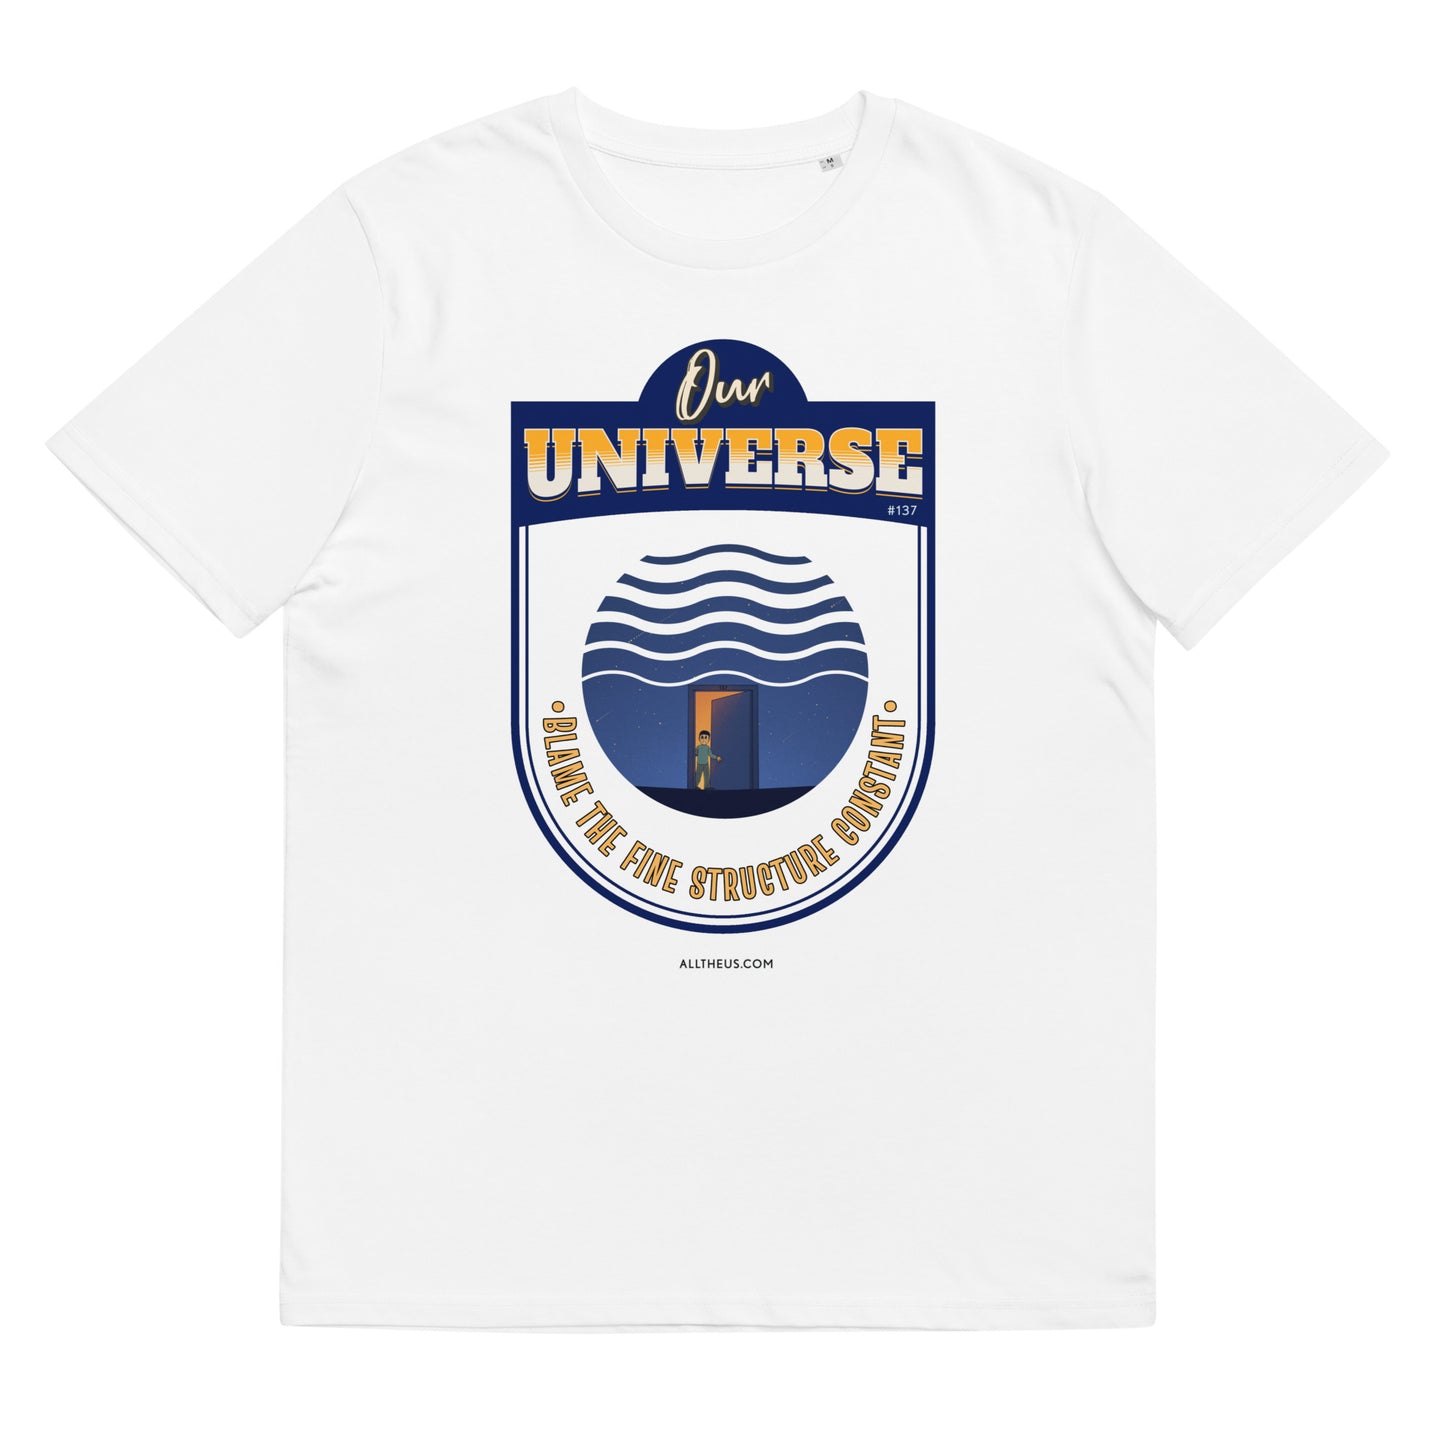 Unisex organic cotton t-shirt - Our Universe, Balanced On the Fine Structure Constant